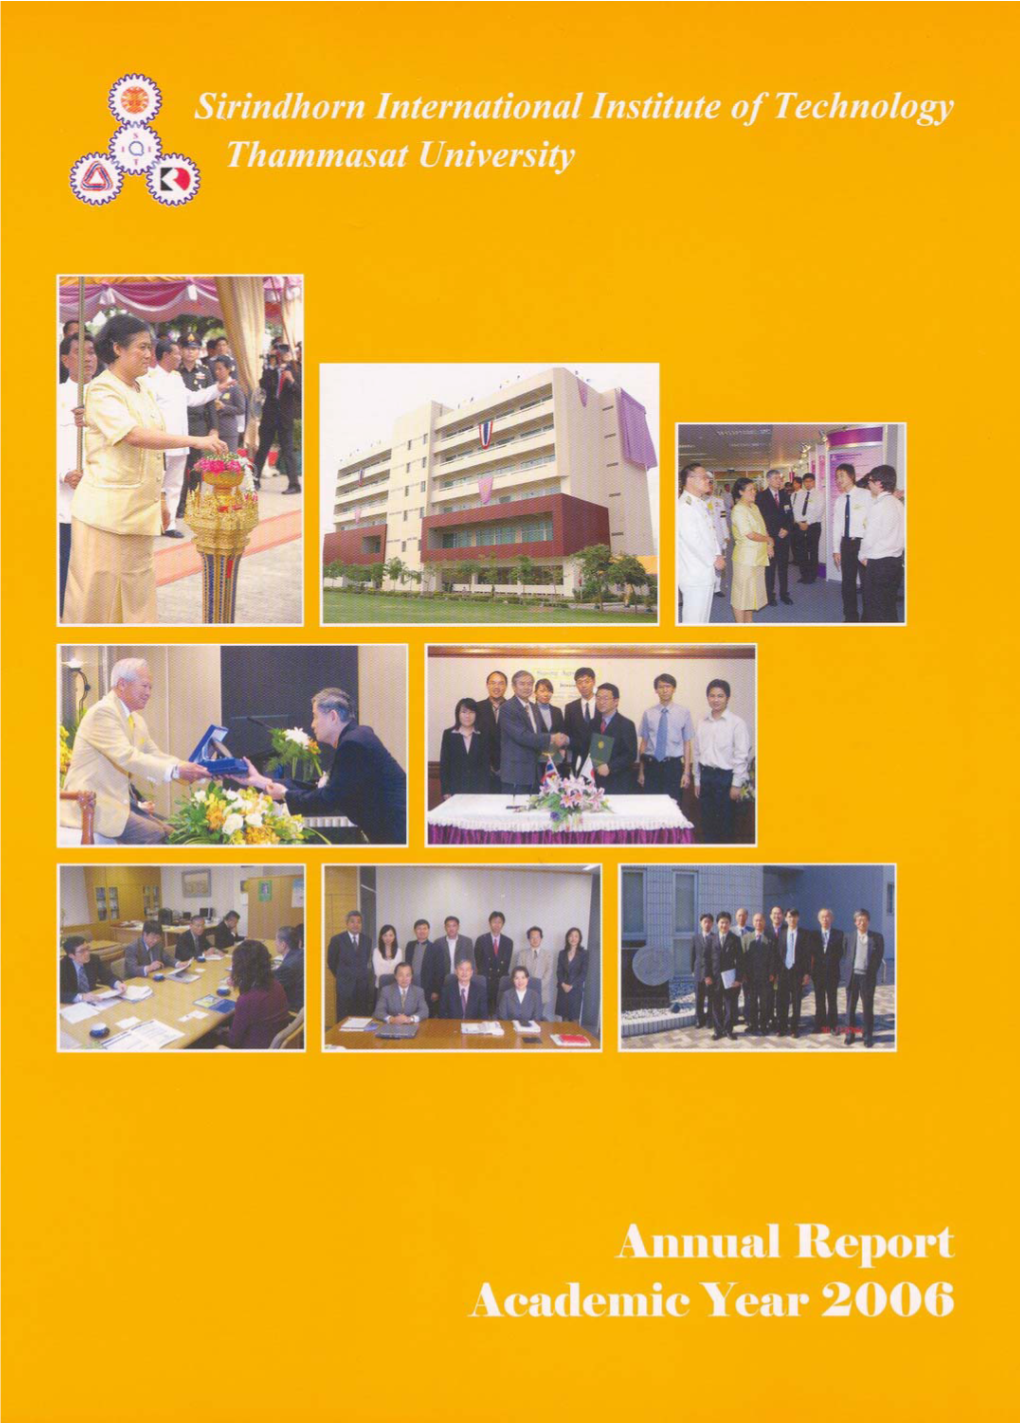 Annual Report, Academic Year 2006